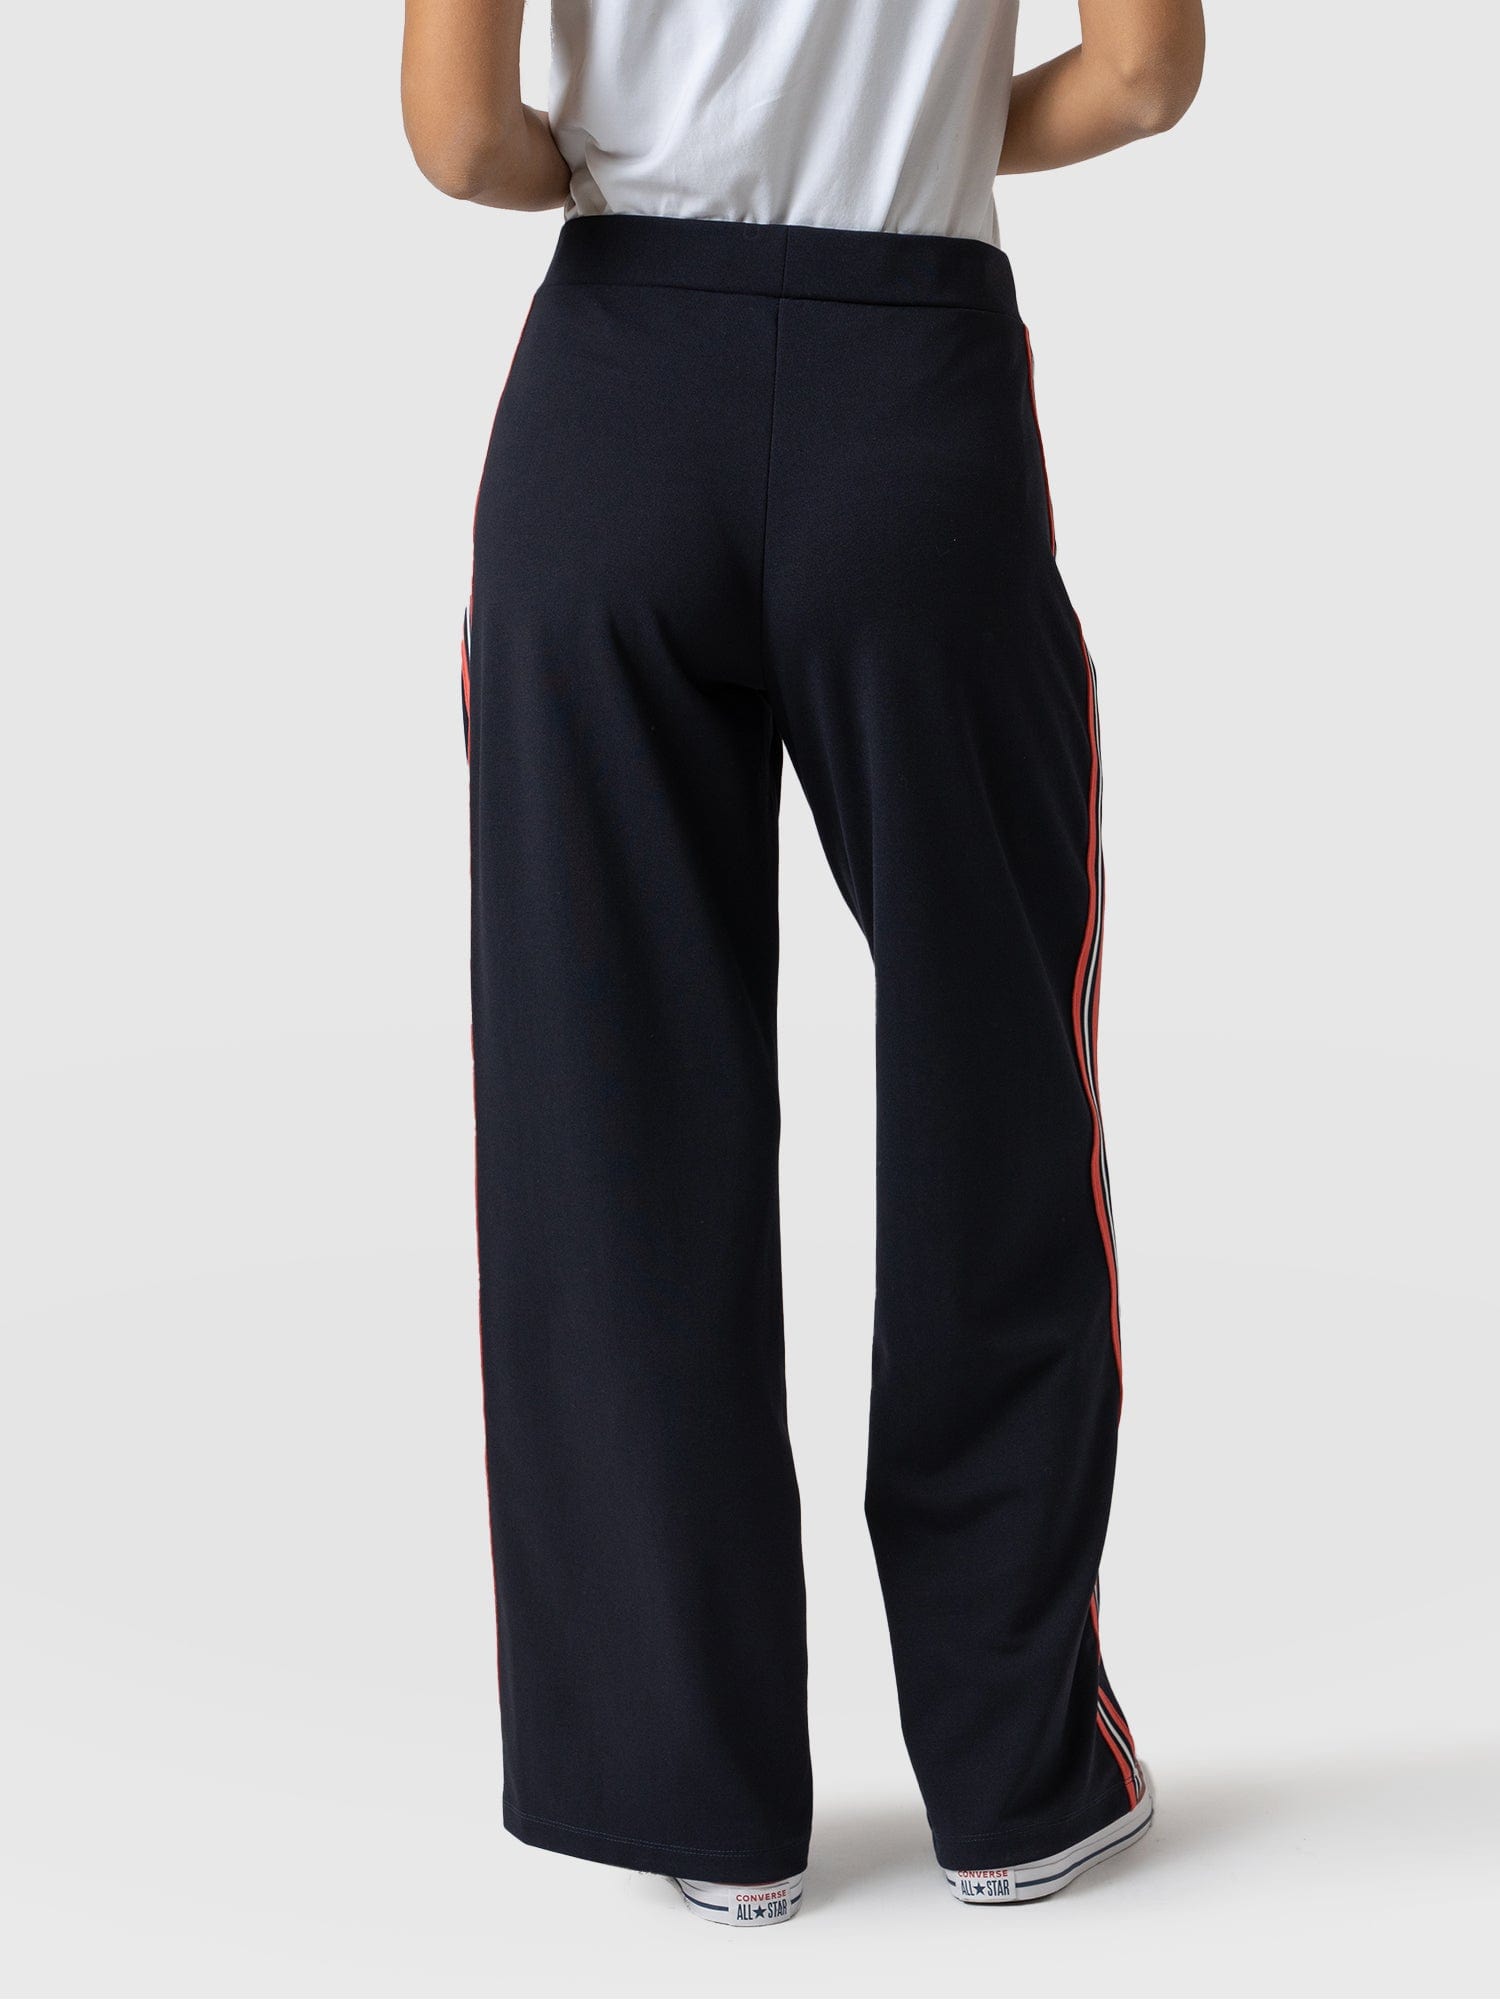 Victory Straight Leg Pant Navy/Red Stripe - Women's Trousers 